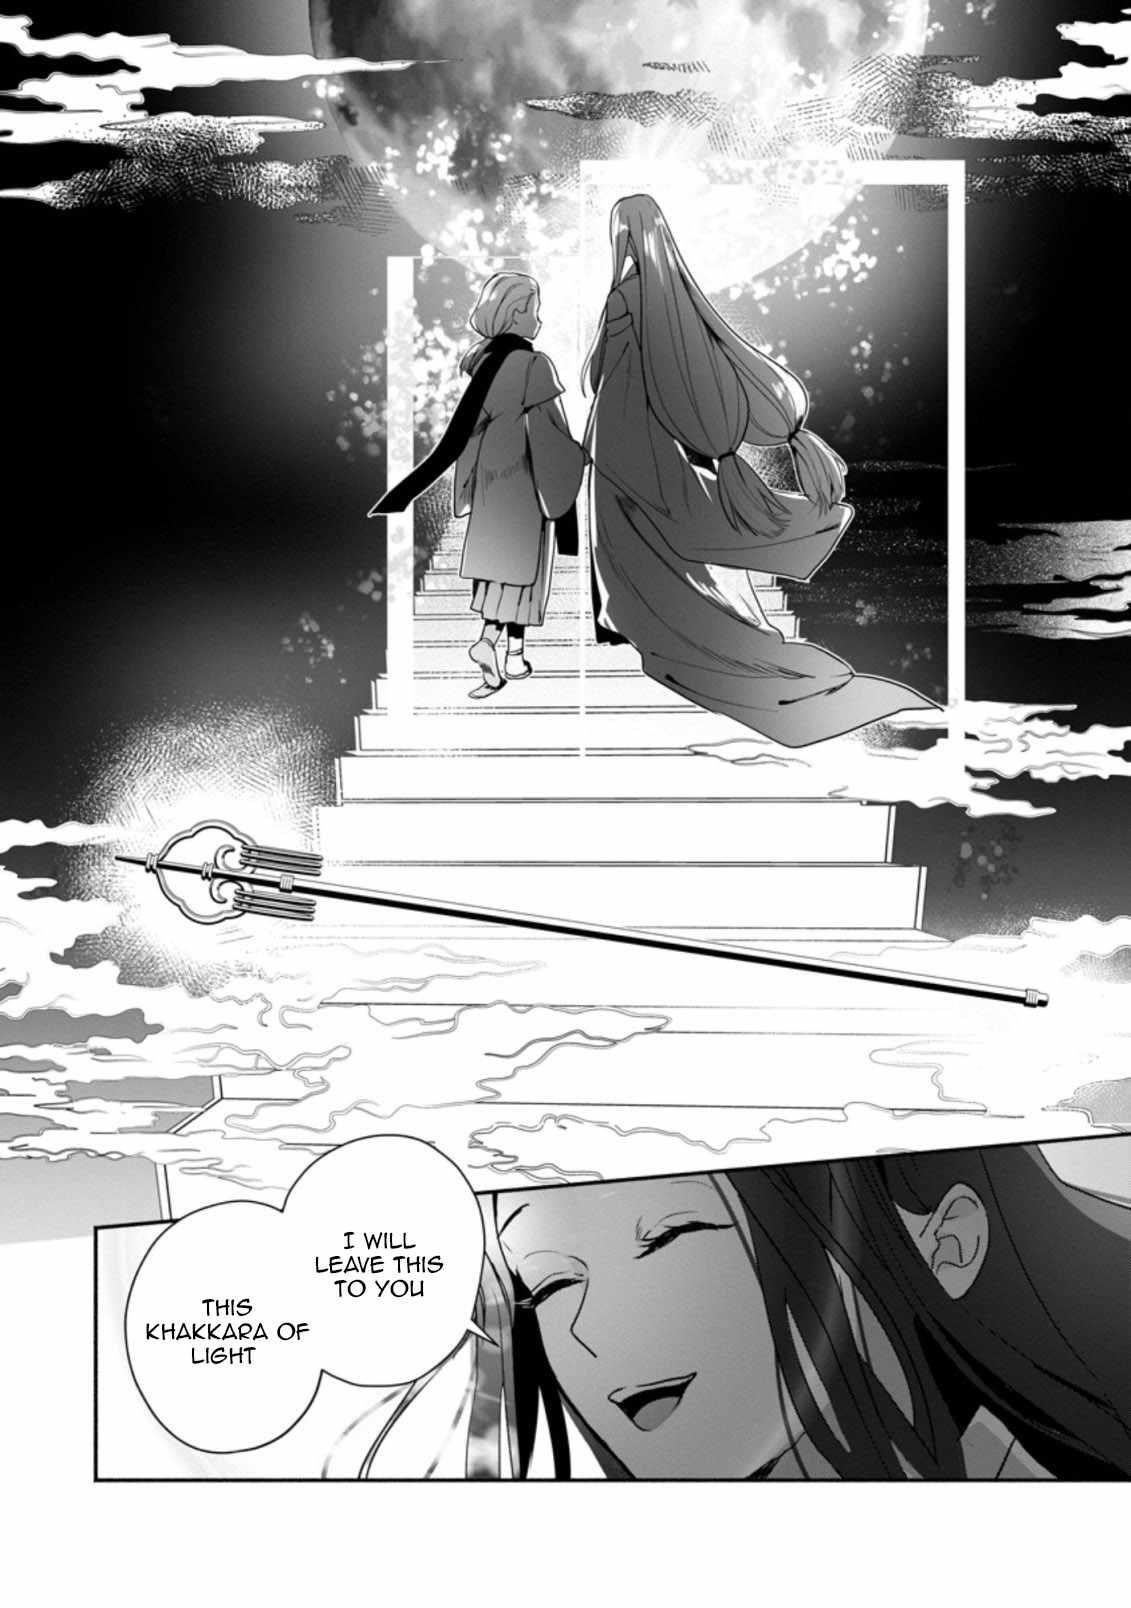 The Daughter of the Marquis, Who Was Executed Under False Accusation, Wants to Spend a Peaceful Life in the Land Protected by God Chapter 25 - Page 14